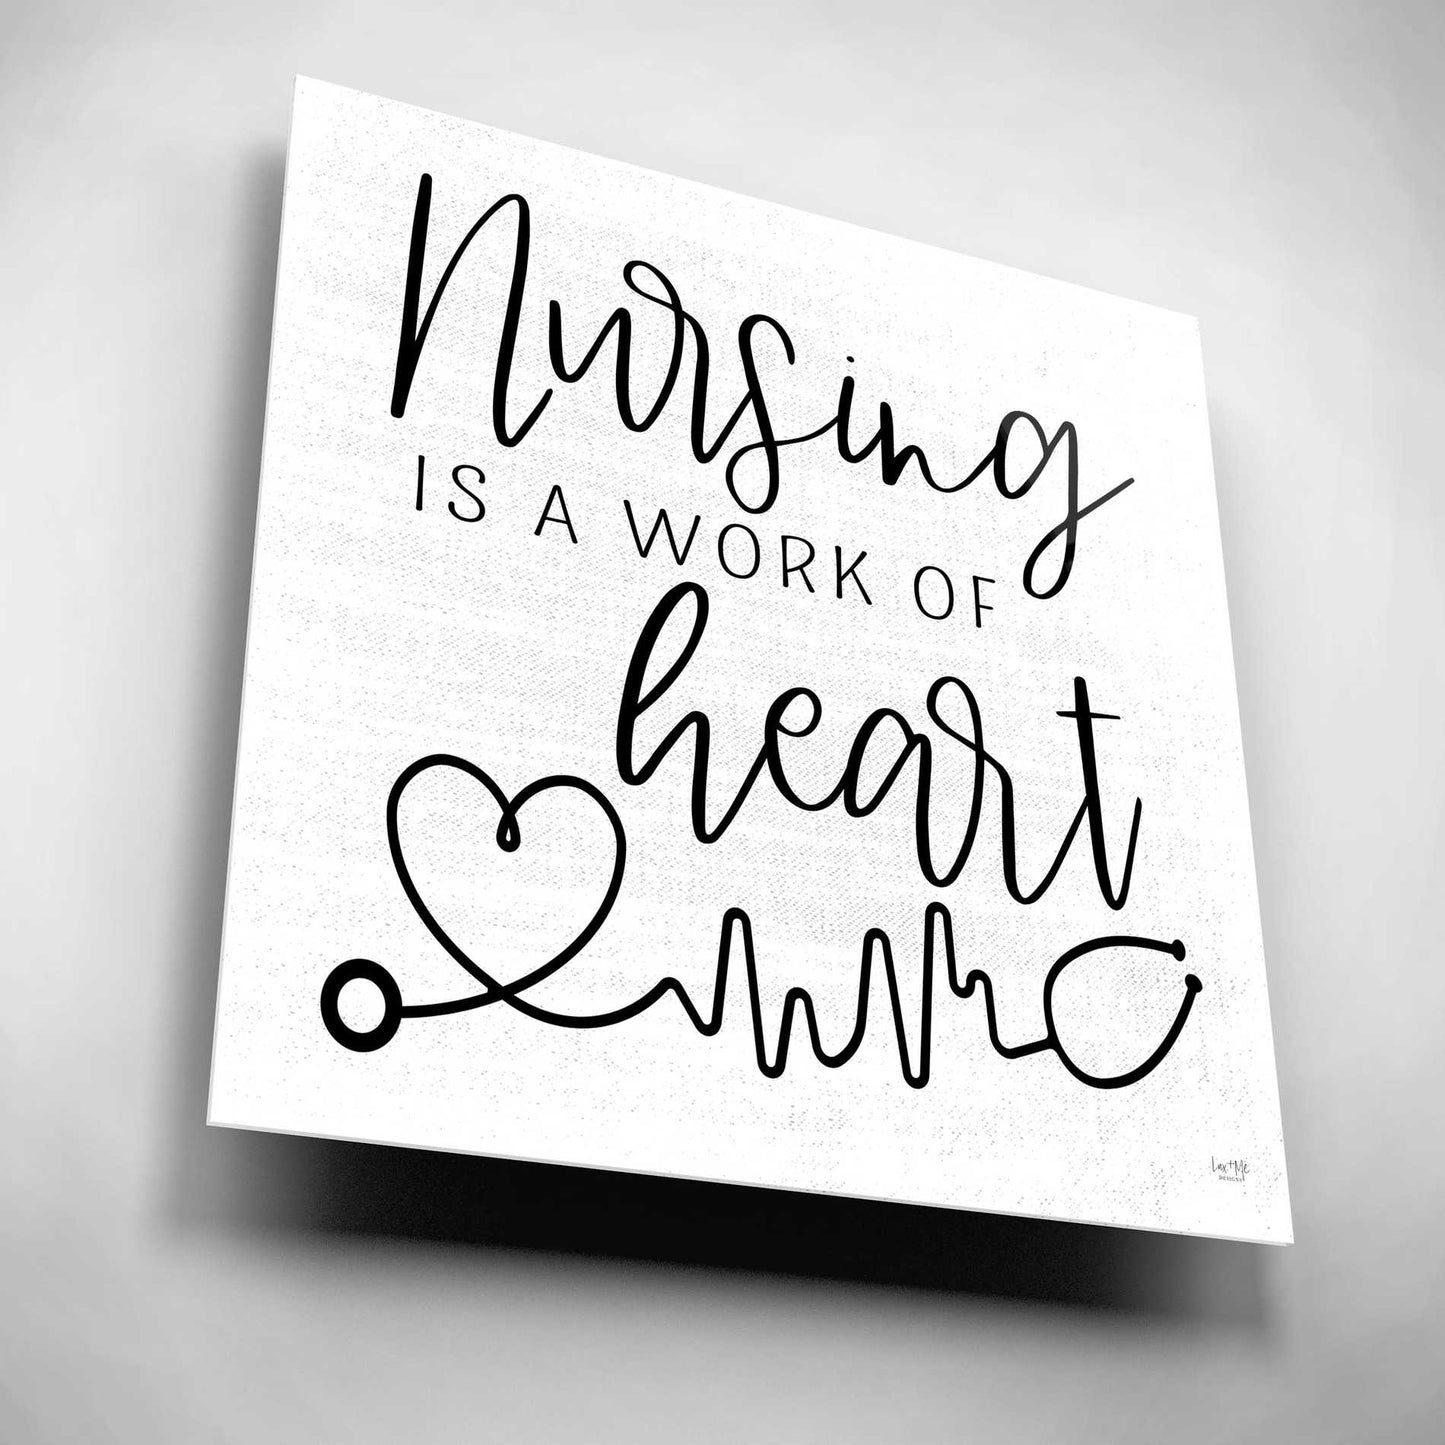 Epic Art 'Nursing a Work of Heart' by Lux + Me Designs, Acrylic Glass Wall Art,12x12